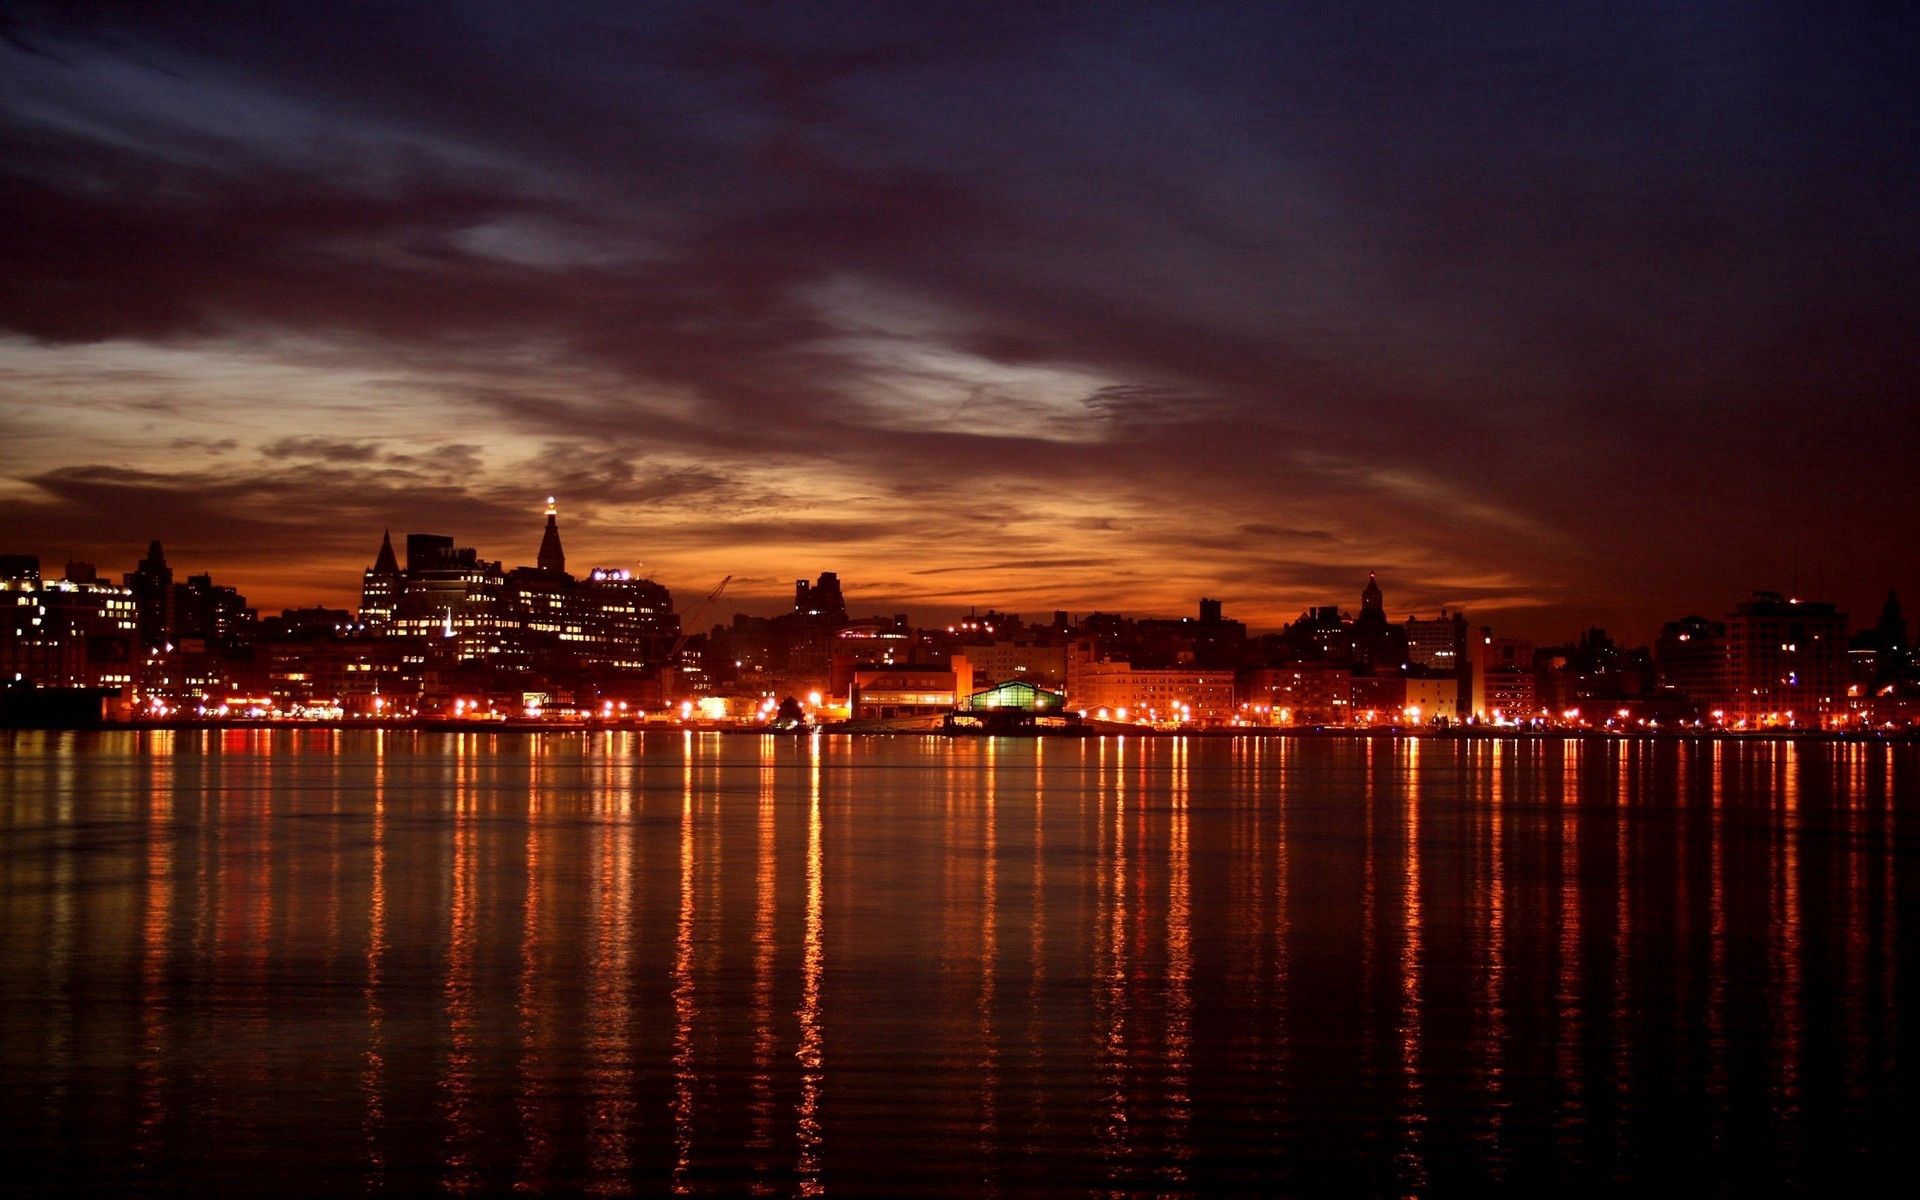 Horizontal Wallpaper landscape, cities, water, houses, sky, building, lights, reflection, skyscrapers, evening, view, bay, embankment, quay